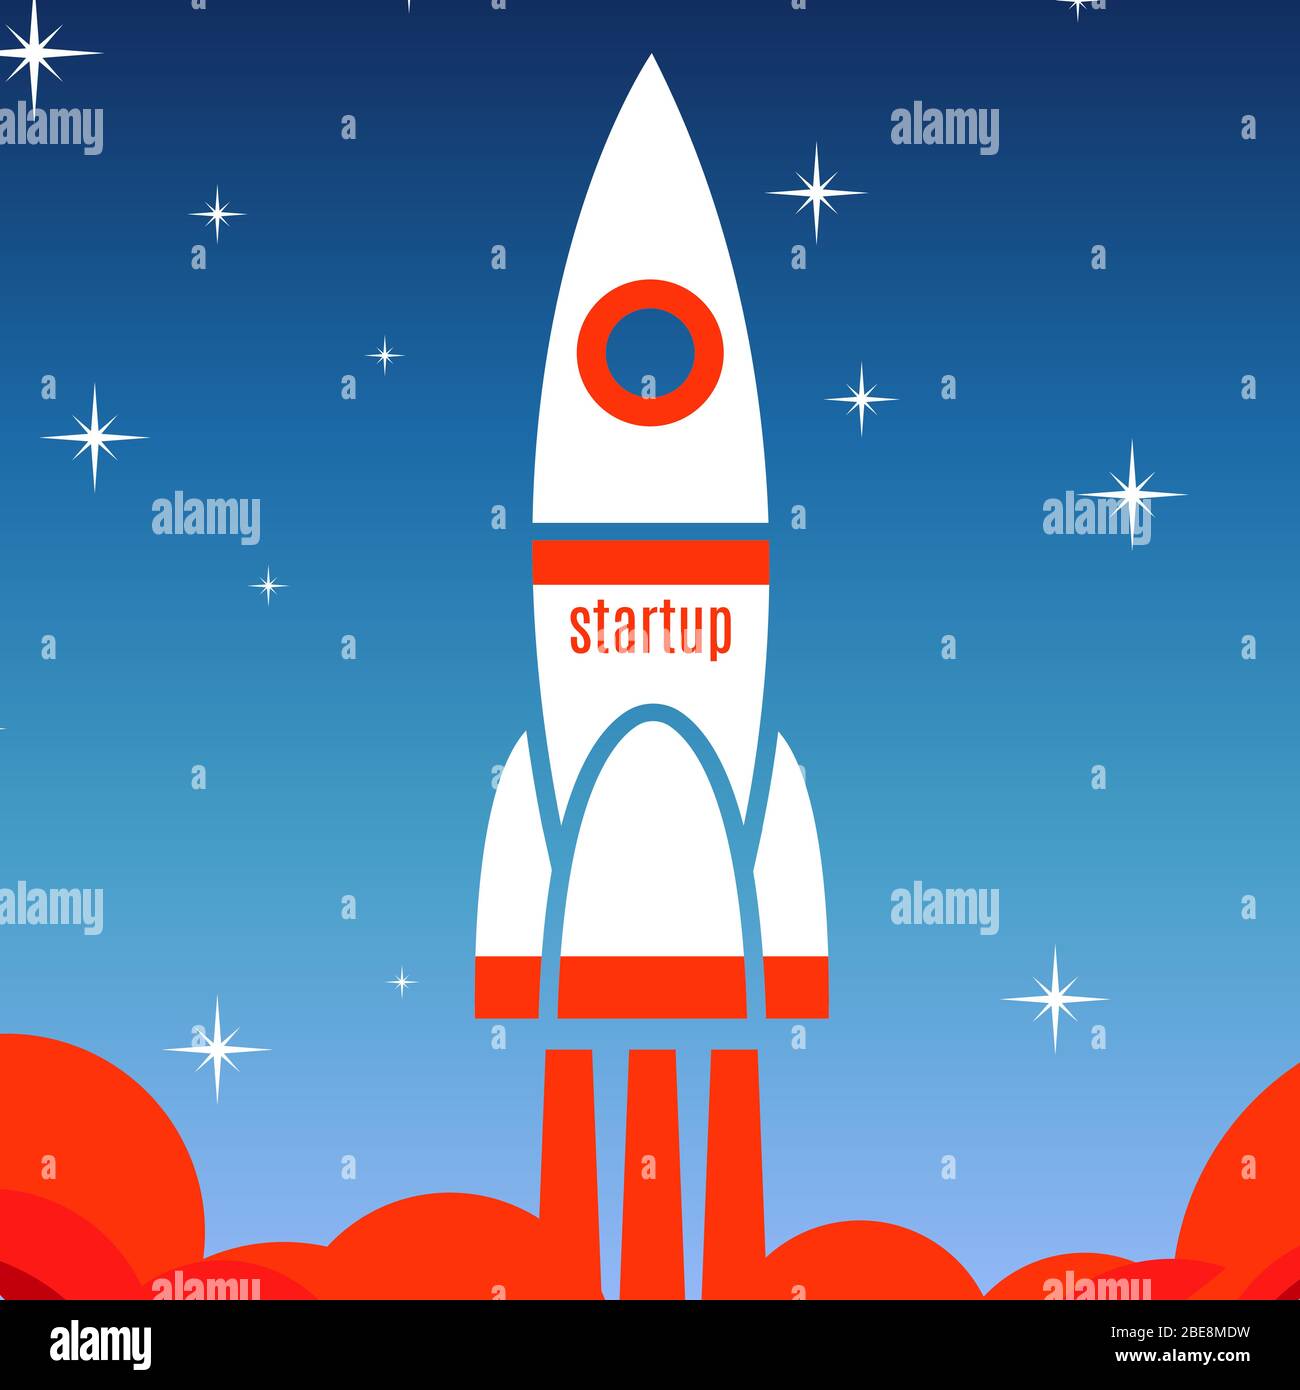 Startup concept background with spaceship. Startup business rocket, vector illustration Stock Vector